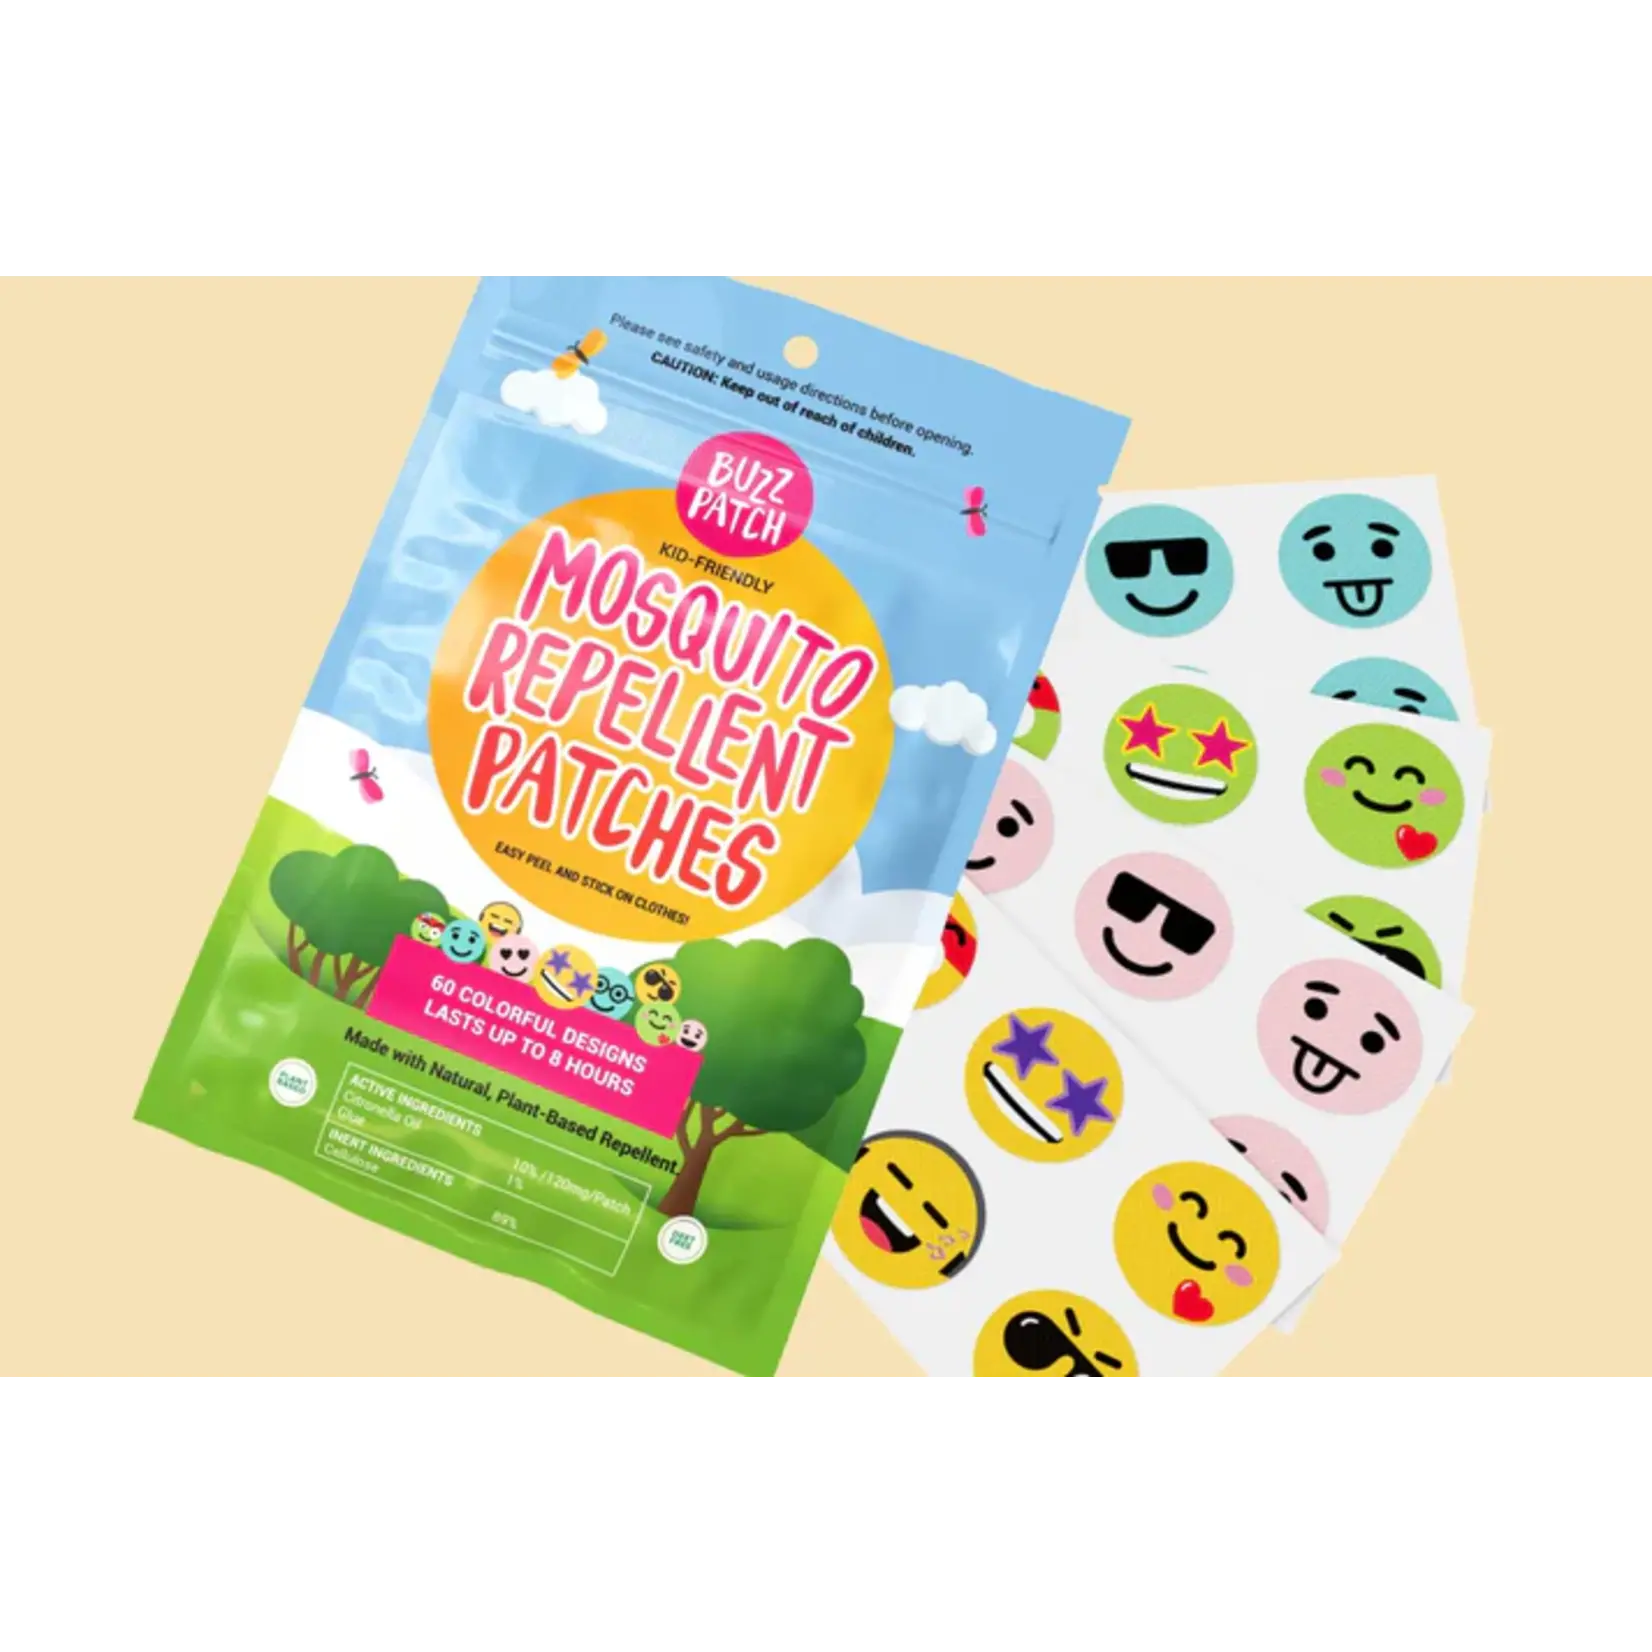 The Natural Patch BuzzPatch Mosquito Repellent Patches